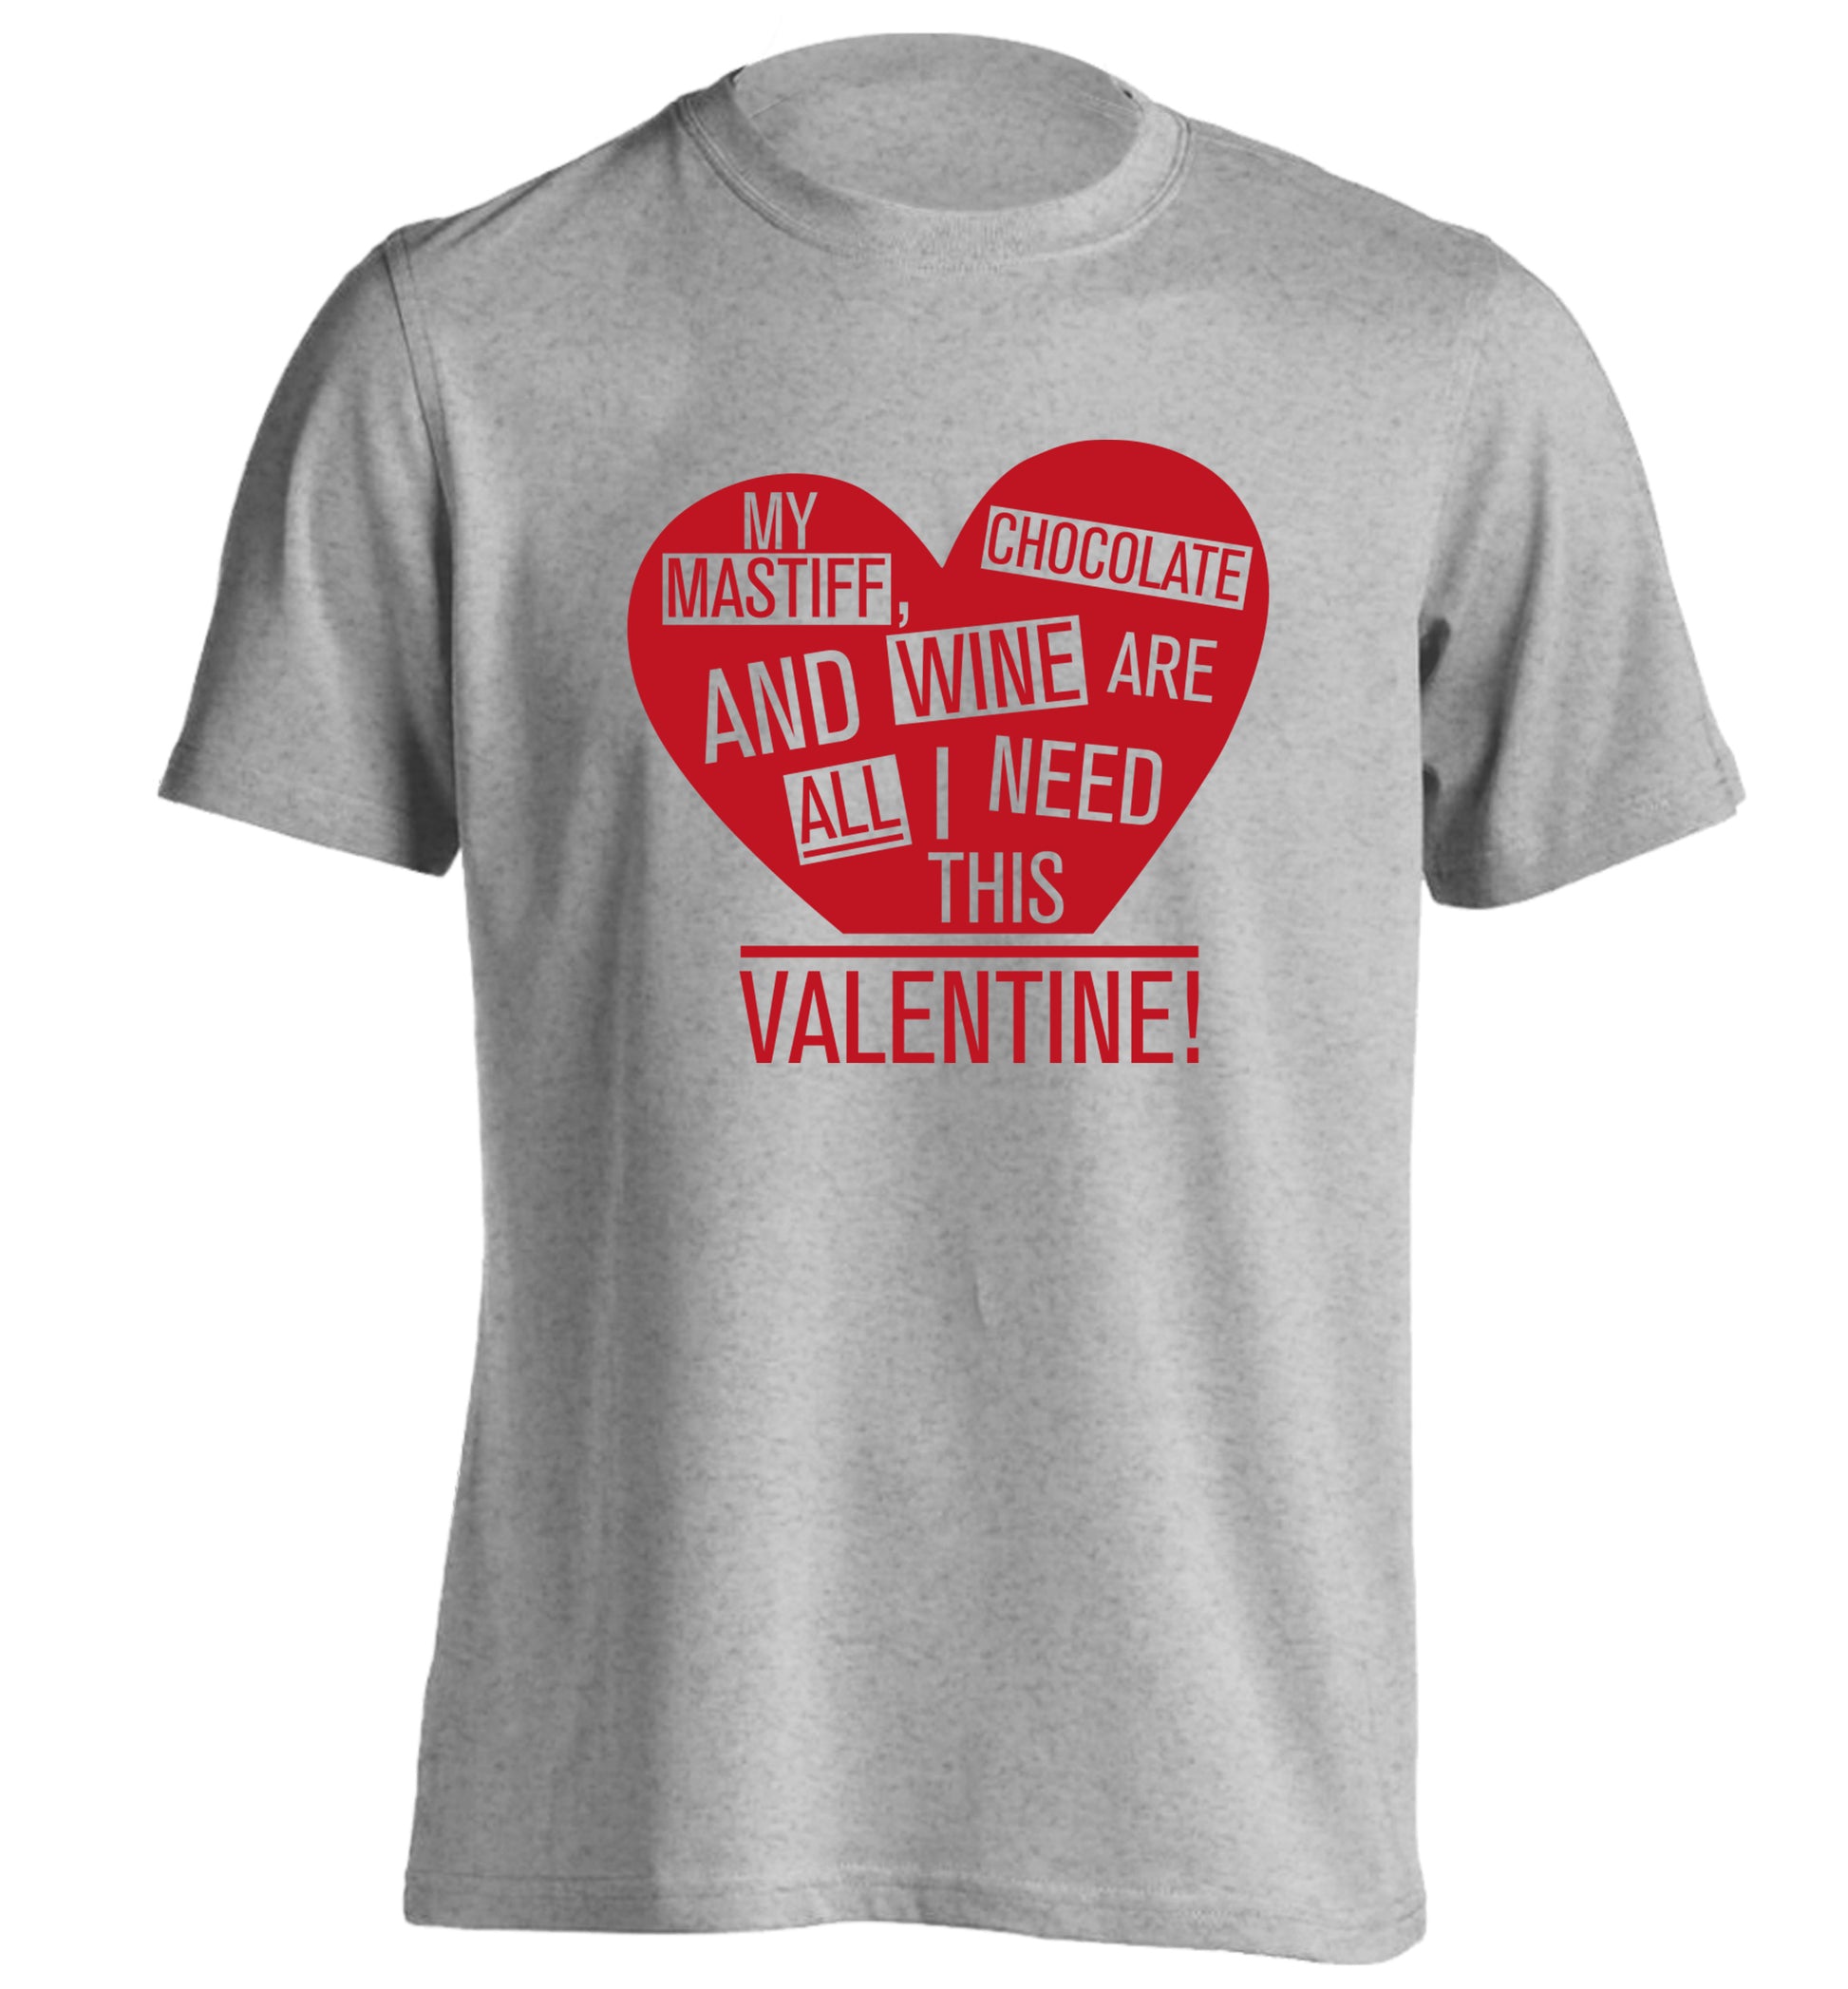 My mastiff, chocolate and wine are all I need this valentine! adults unisex grey Tshirt 2XL